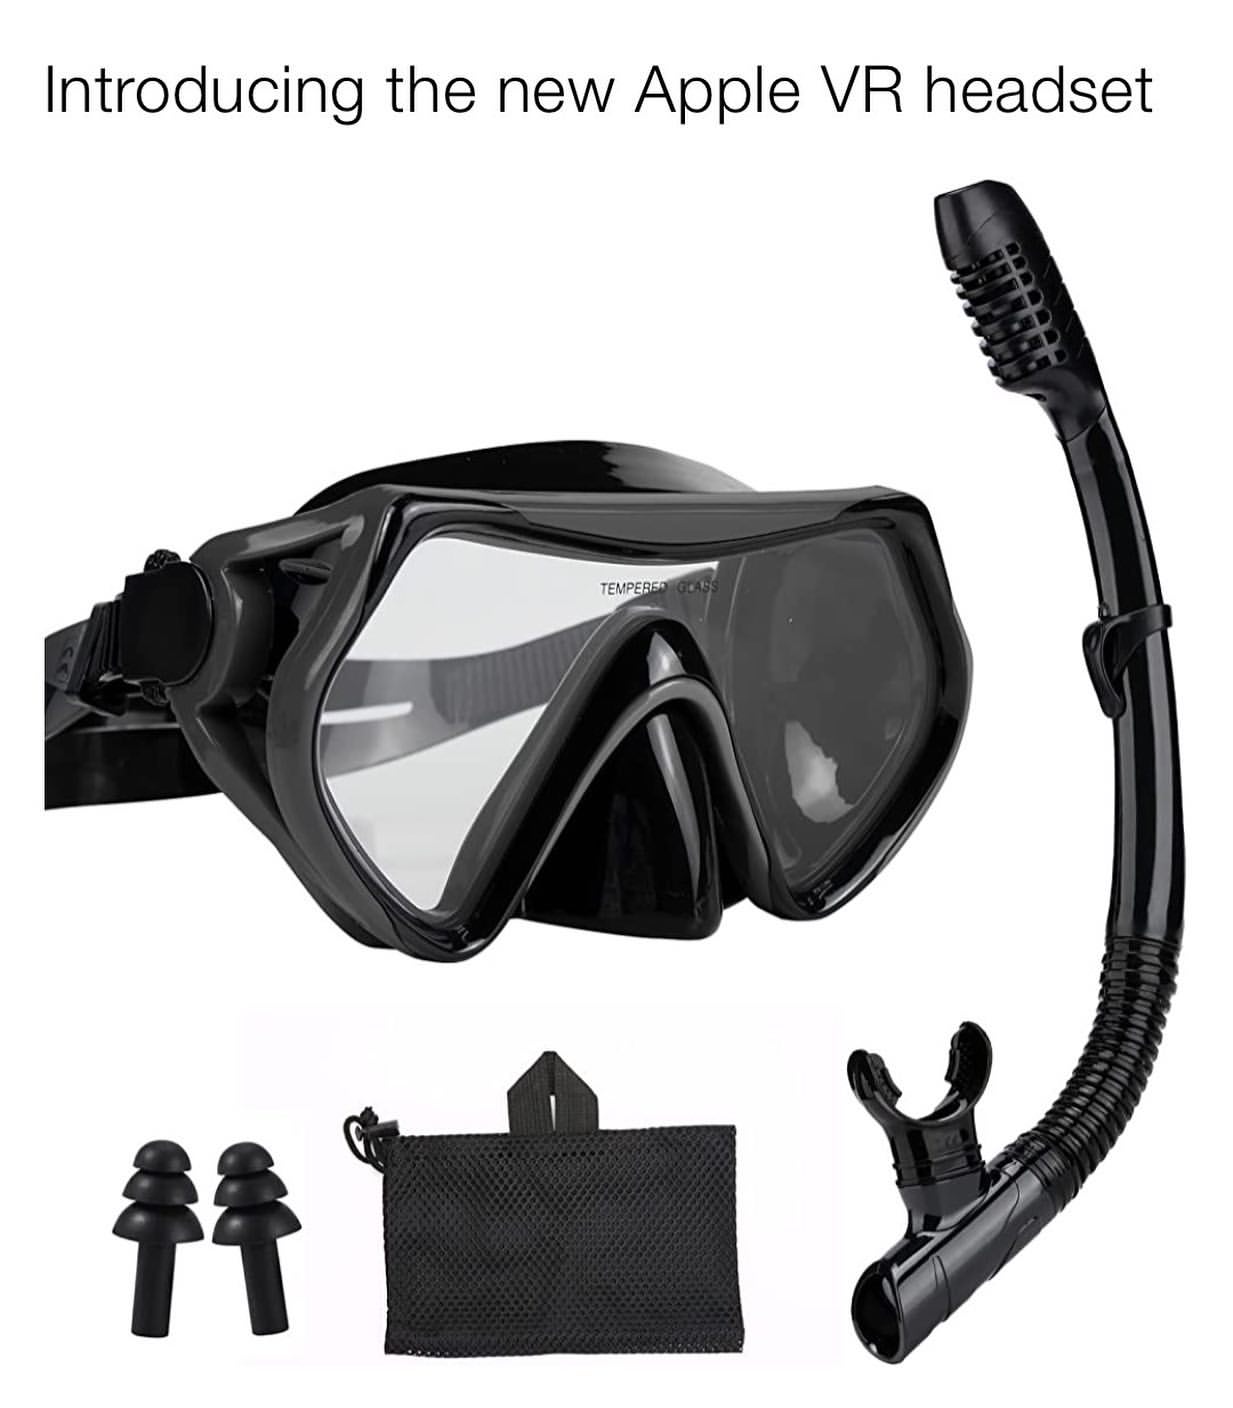 Introducing the new Apple VR headset.